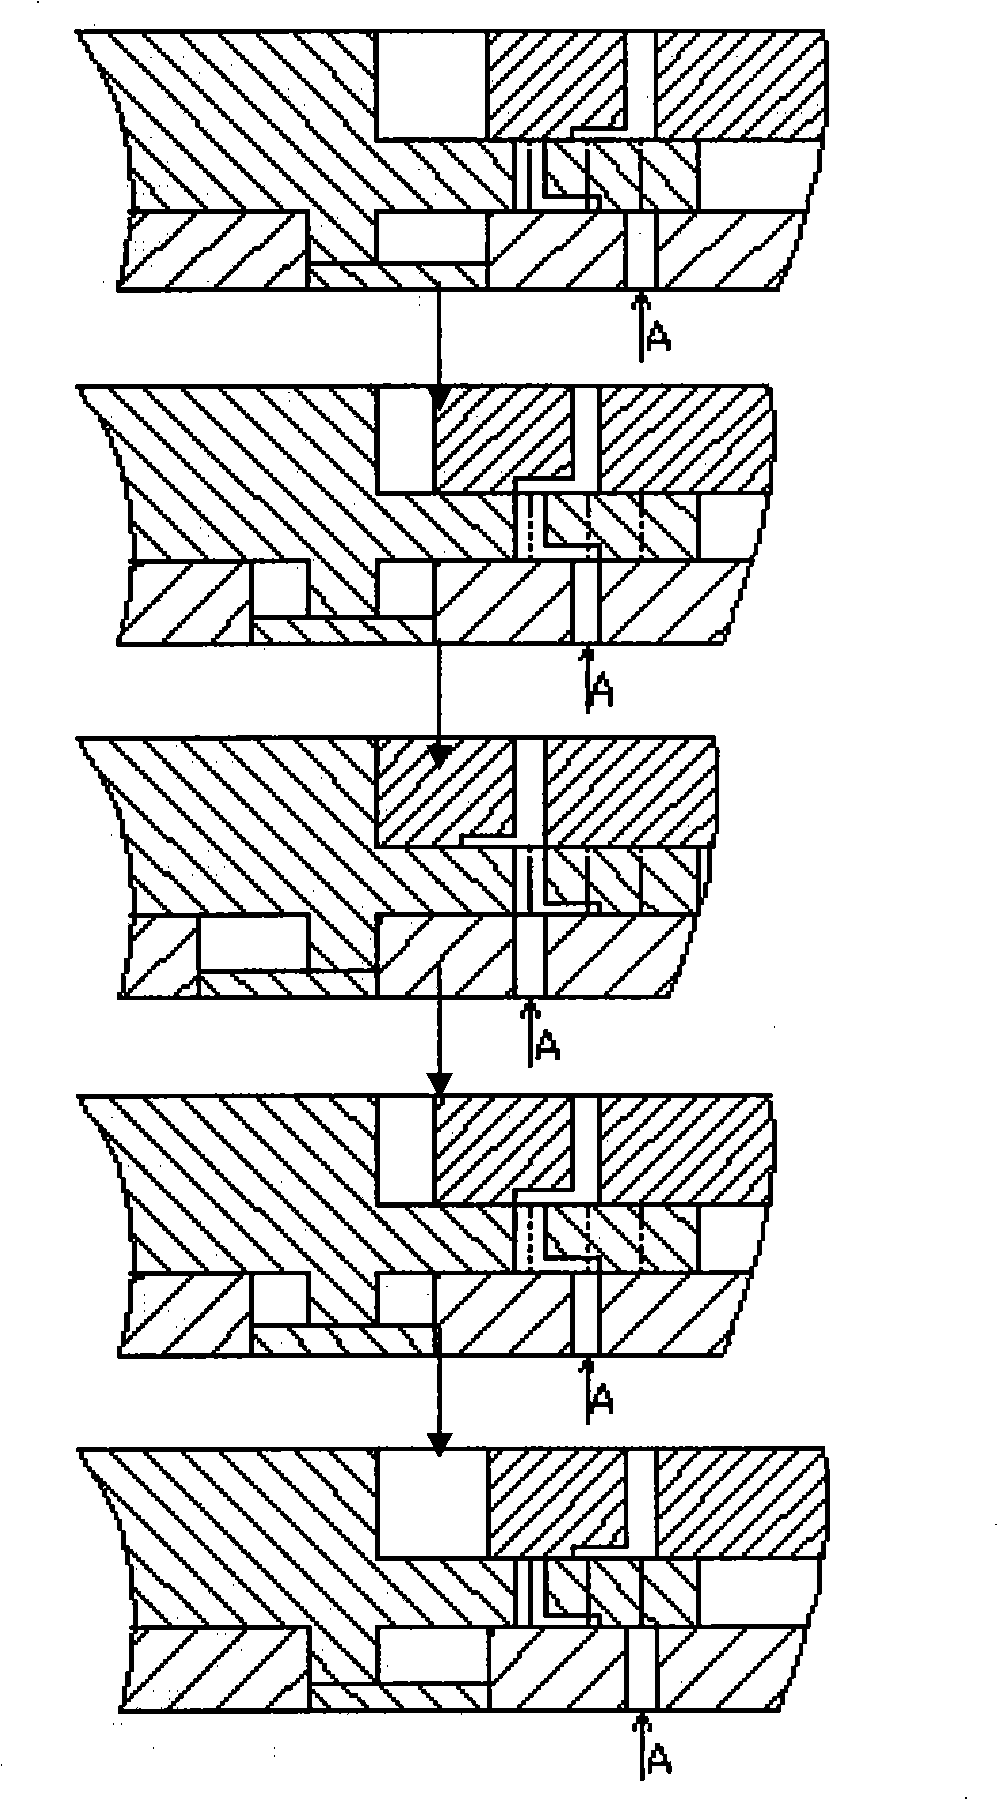 Co-injection molding apparatus